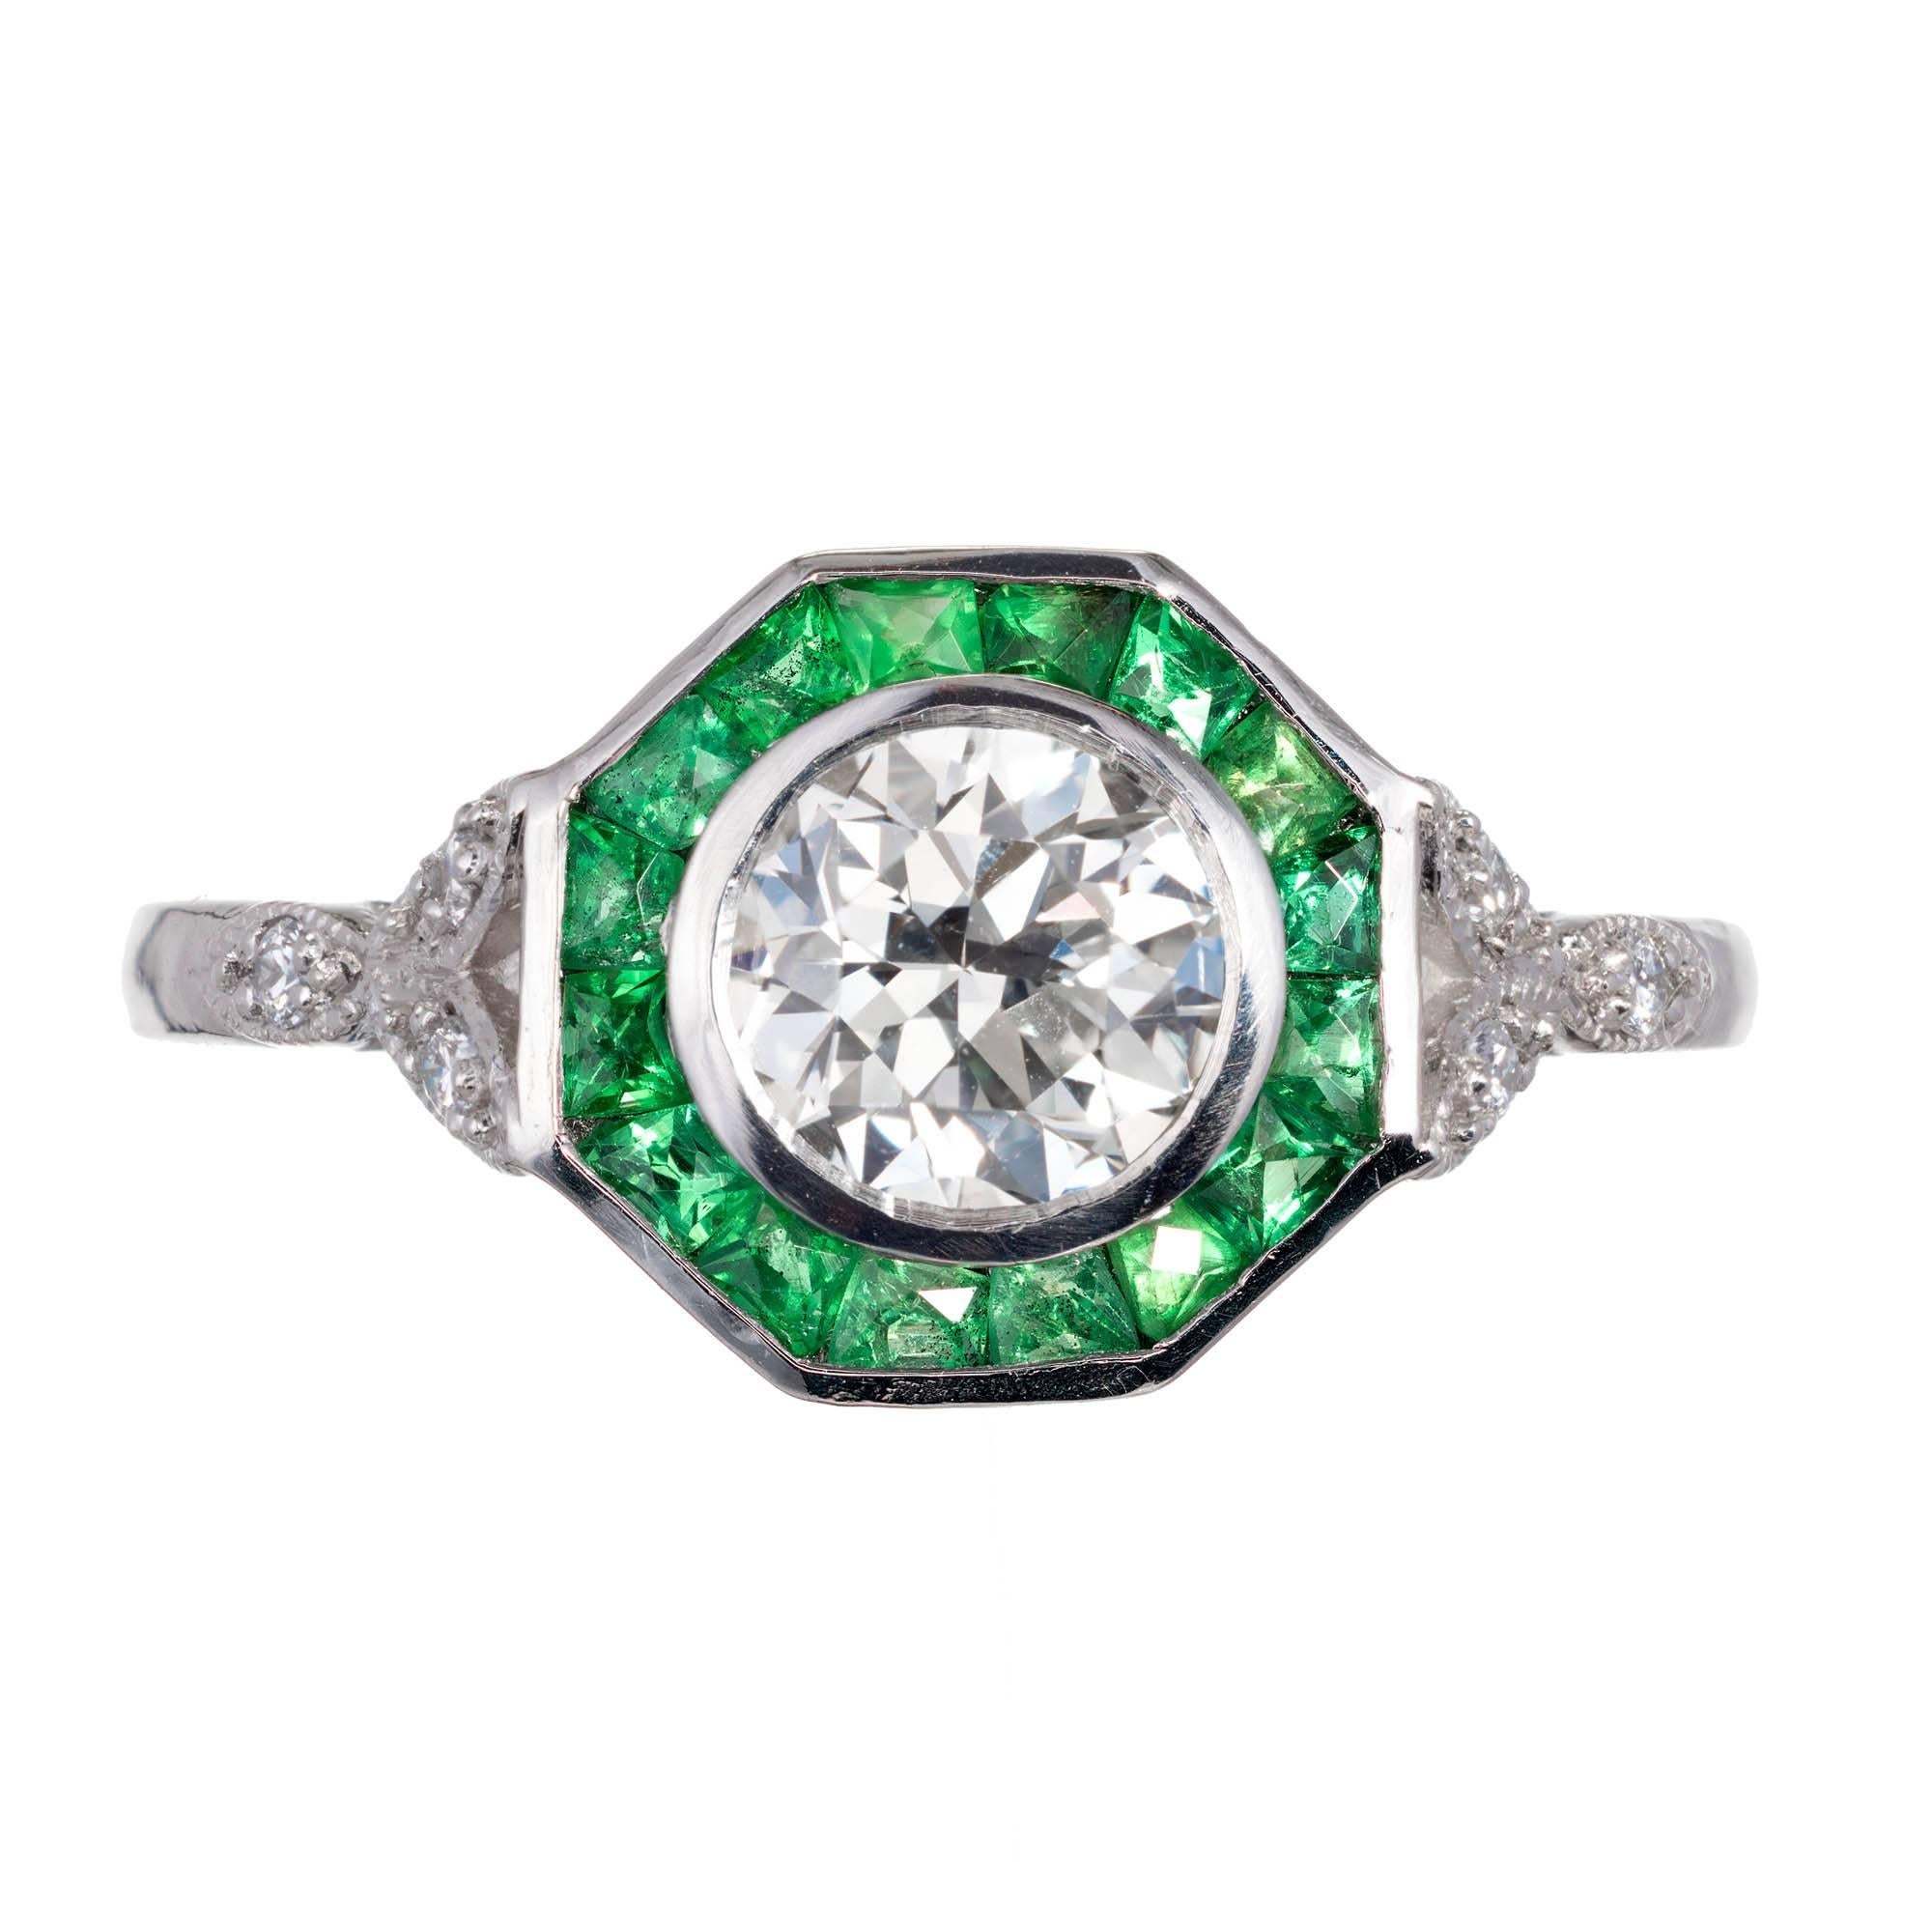 Platinum Diamond and emerald engagement ring with 8-sided top set with French style Calibré cut Emeralds and Diamond accents. EGL certificated.

1 round Diamond, approx. total weight .72cts, J – K, VS1, EGL certificate # US314492601D
6 round full